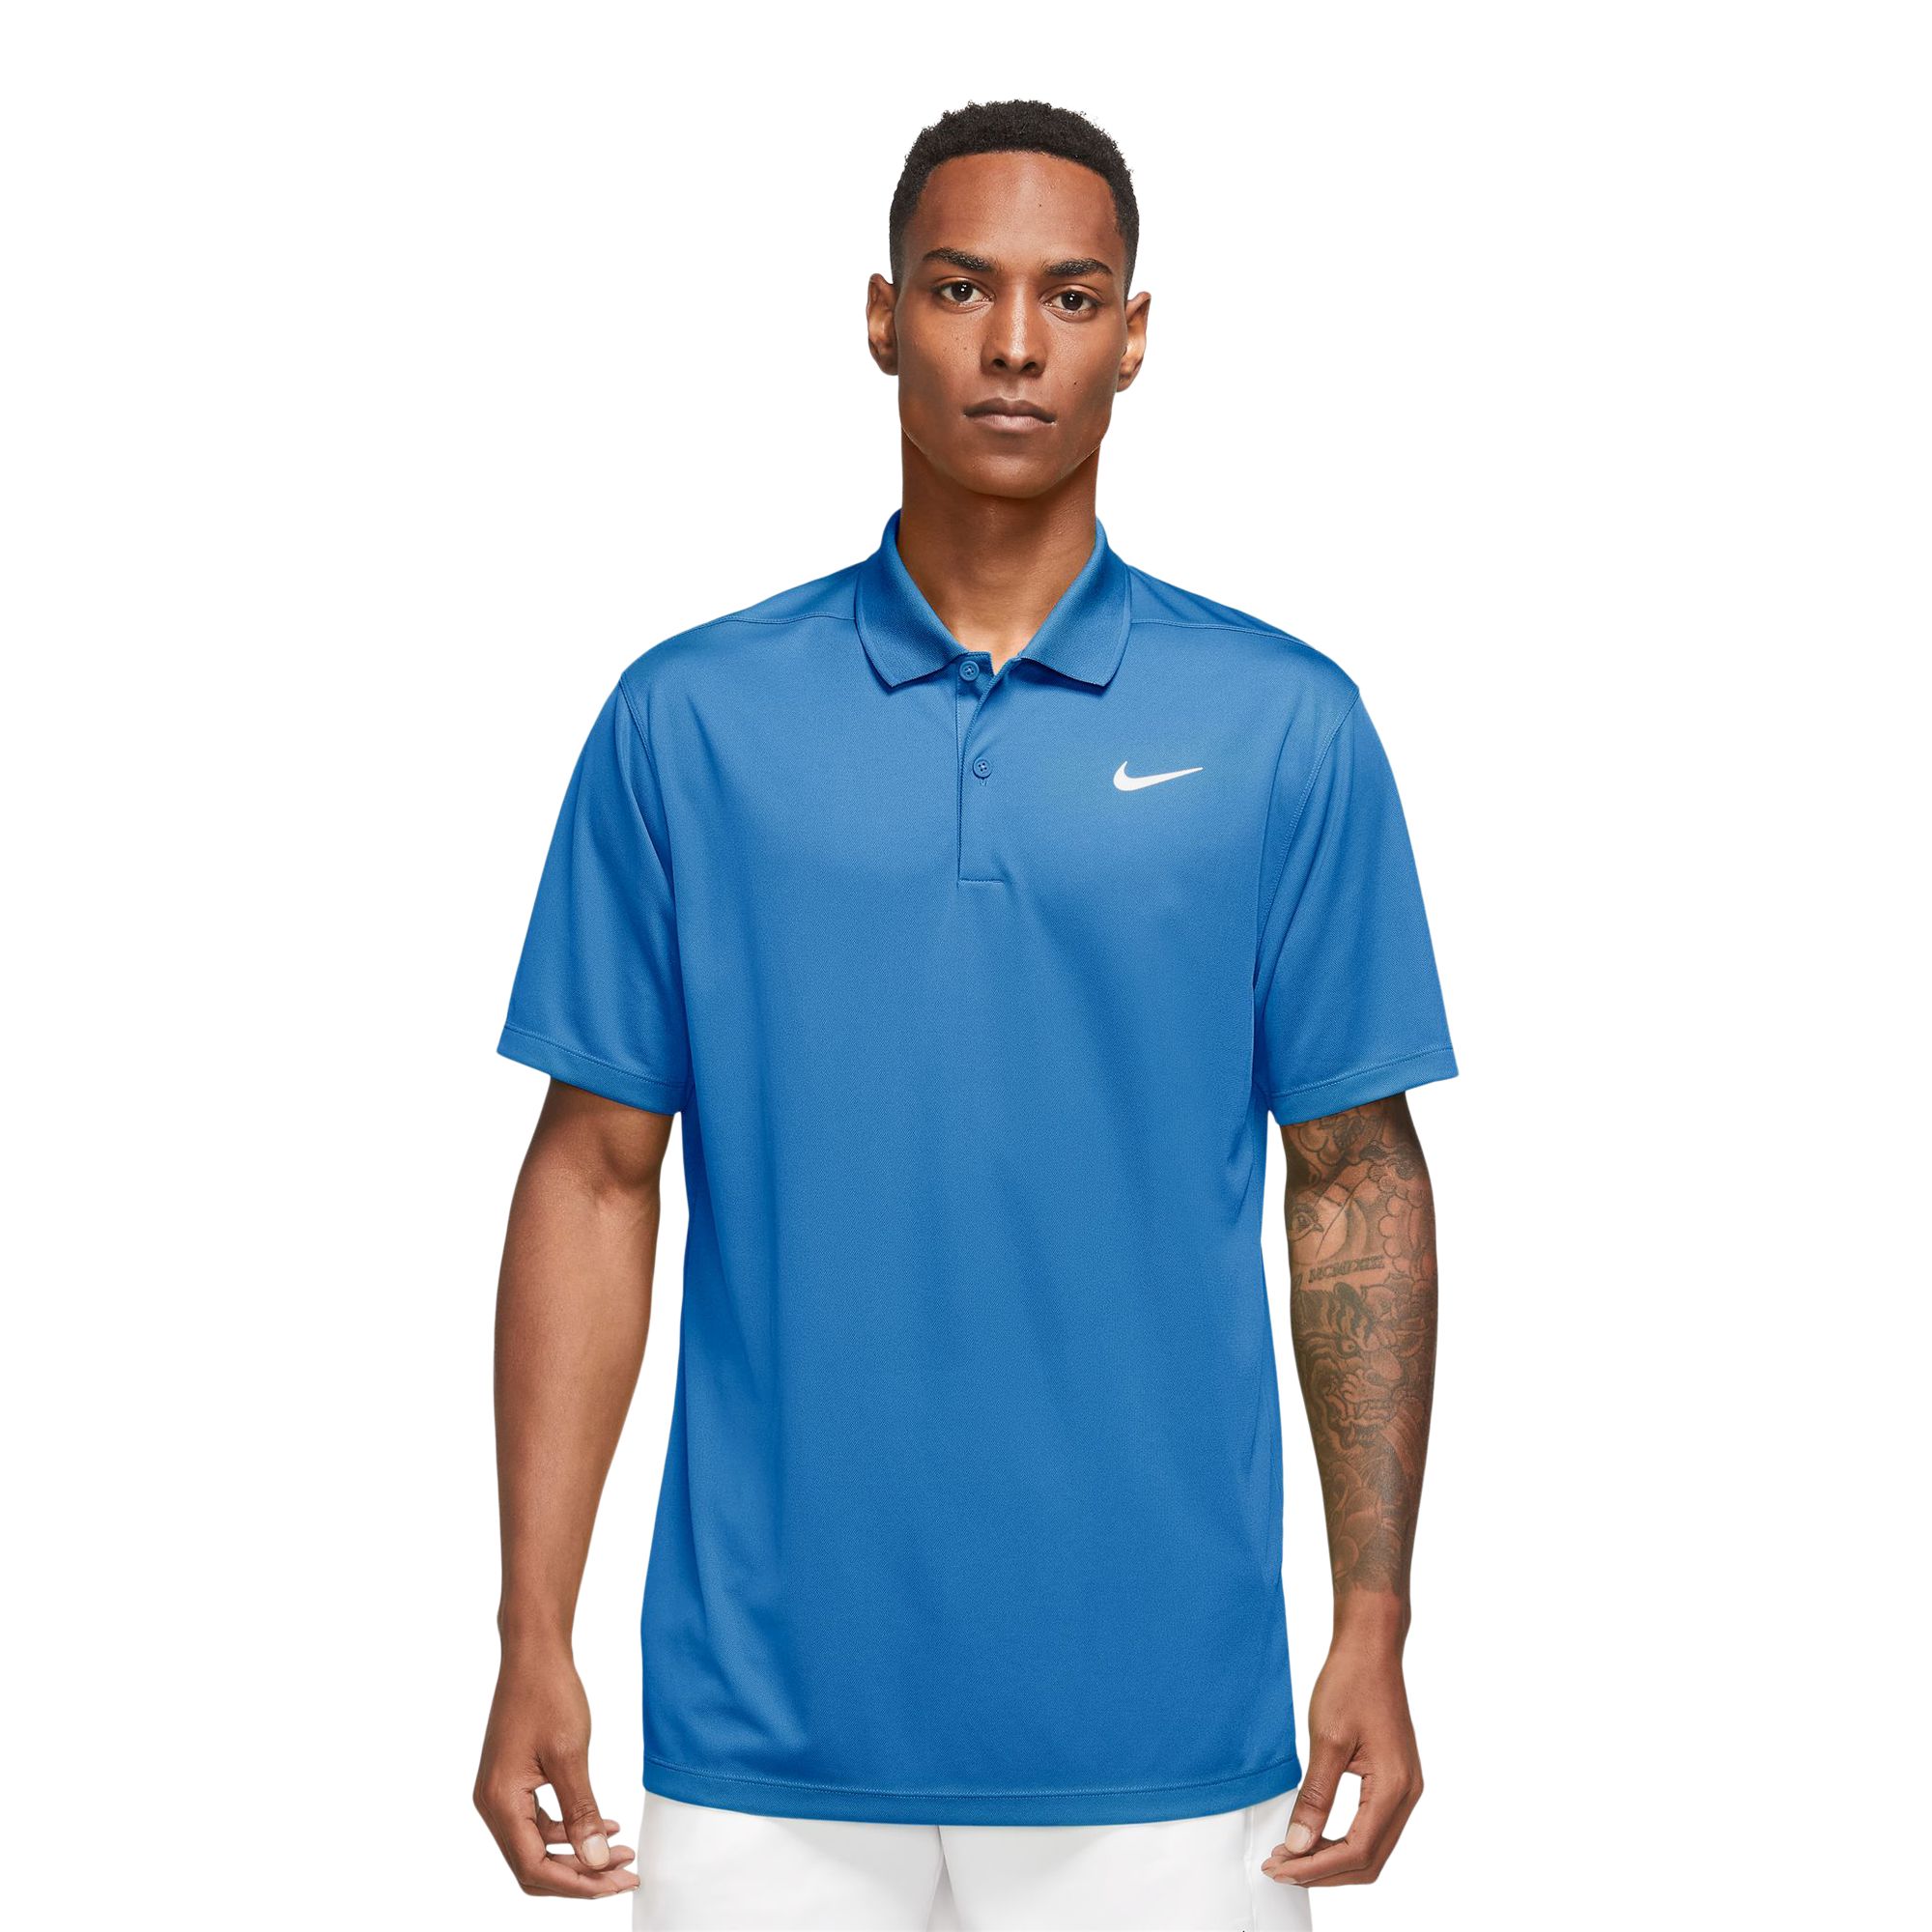 Image of Nike Men's Dri-FIT Victory Pique Polo T Shirt